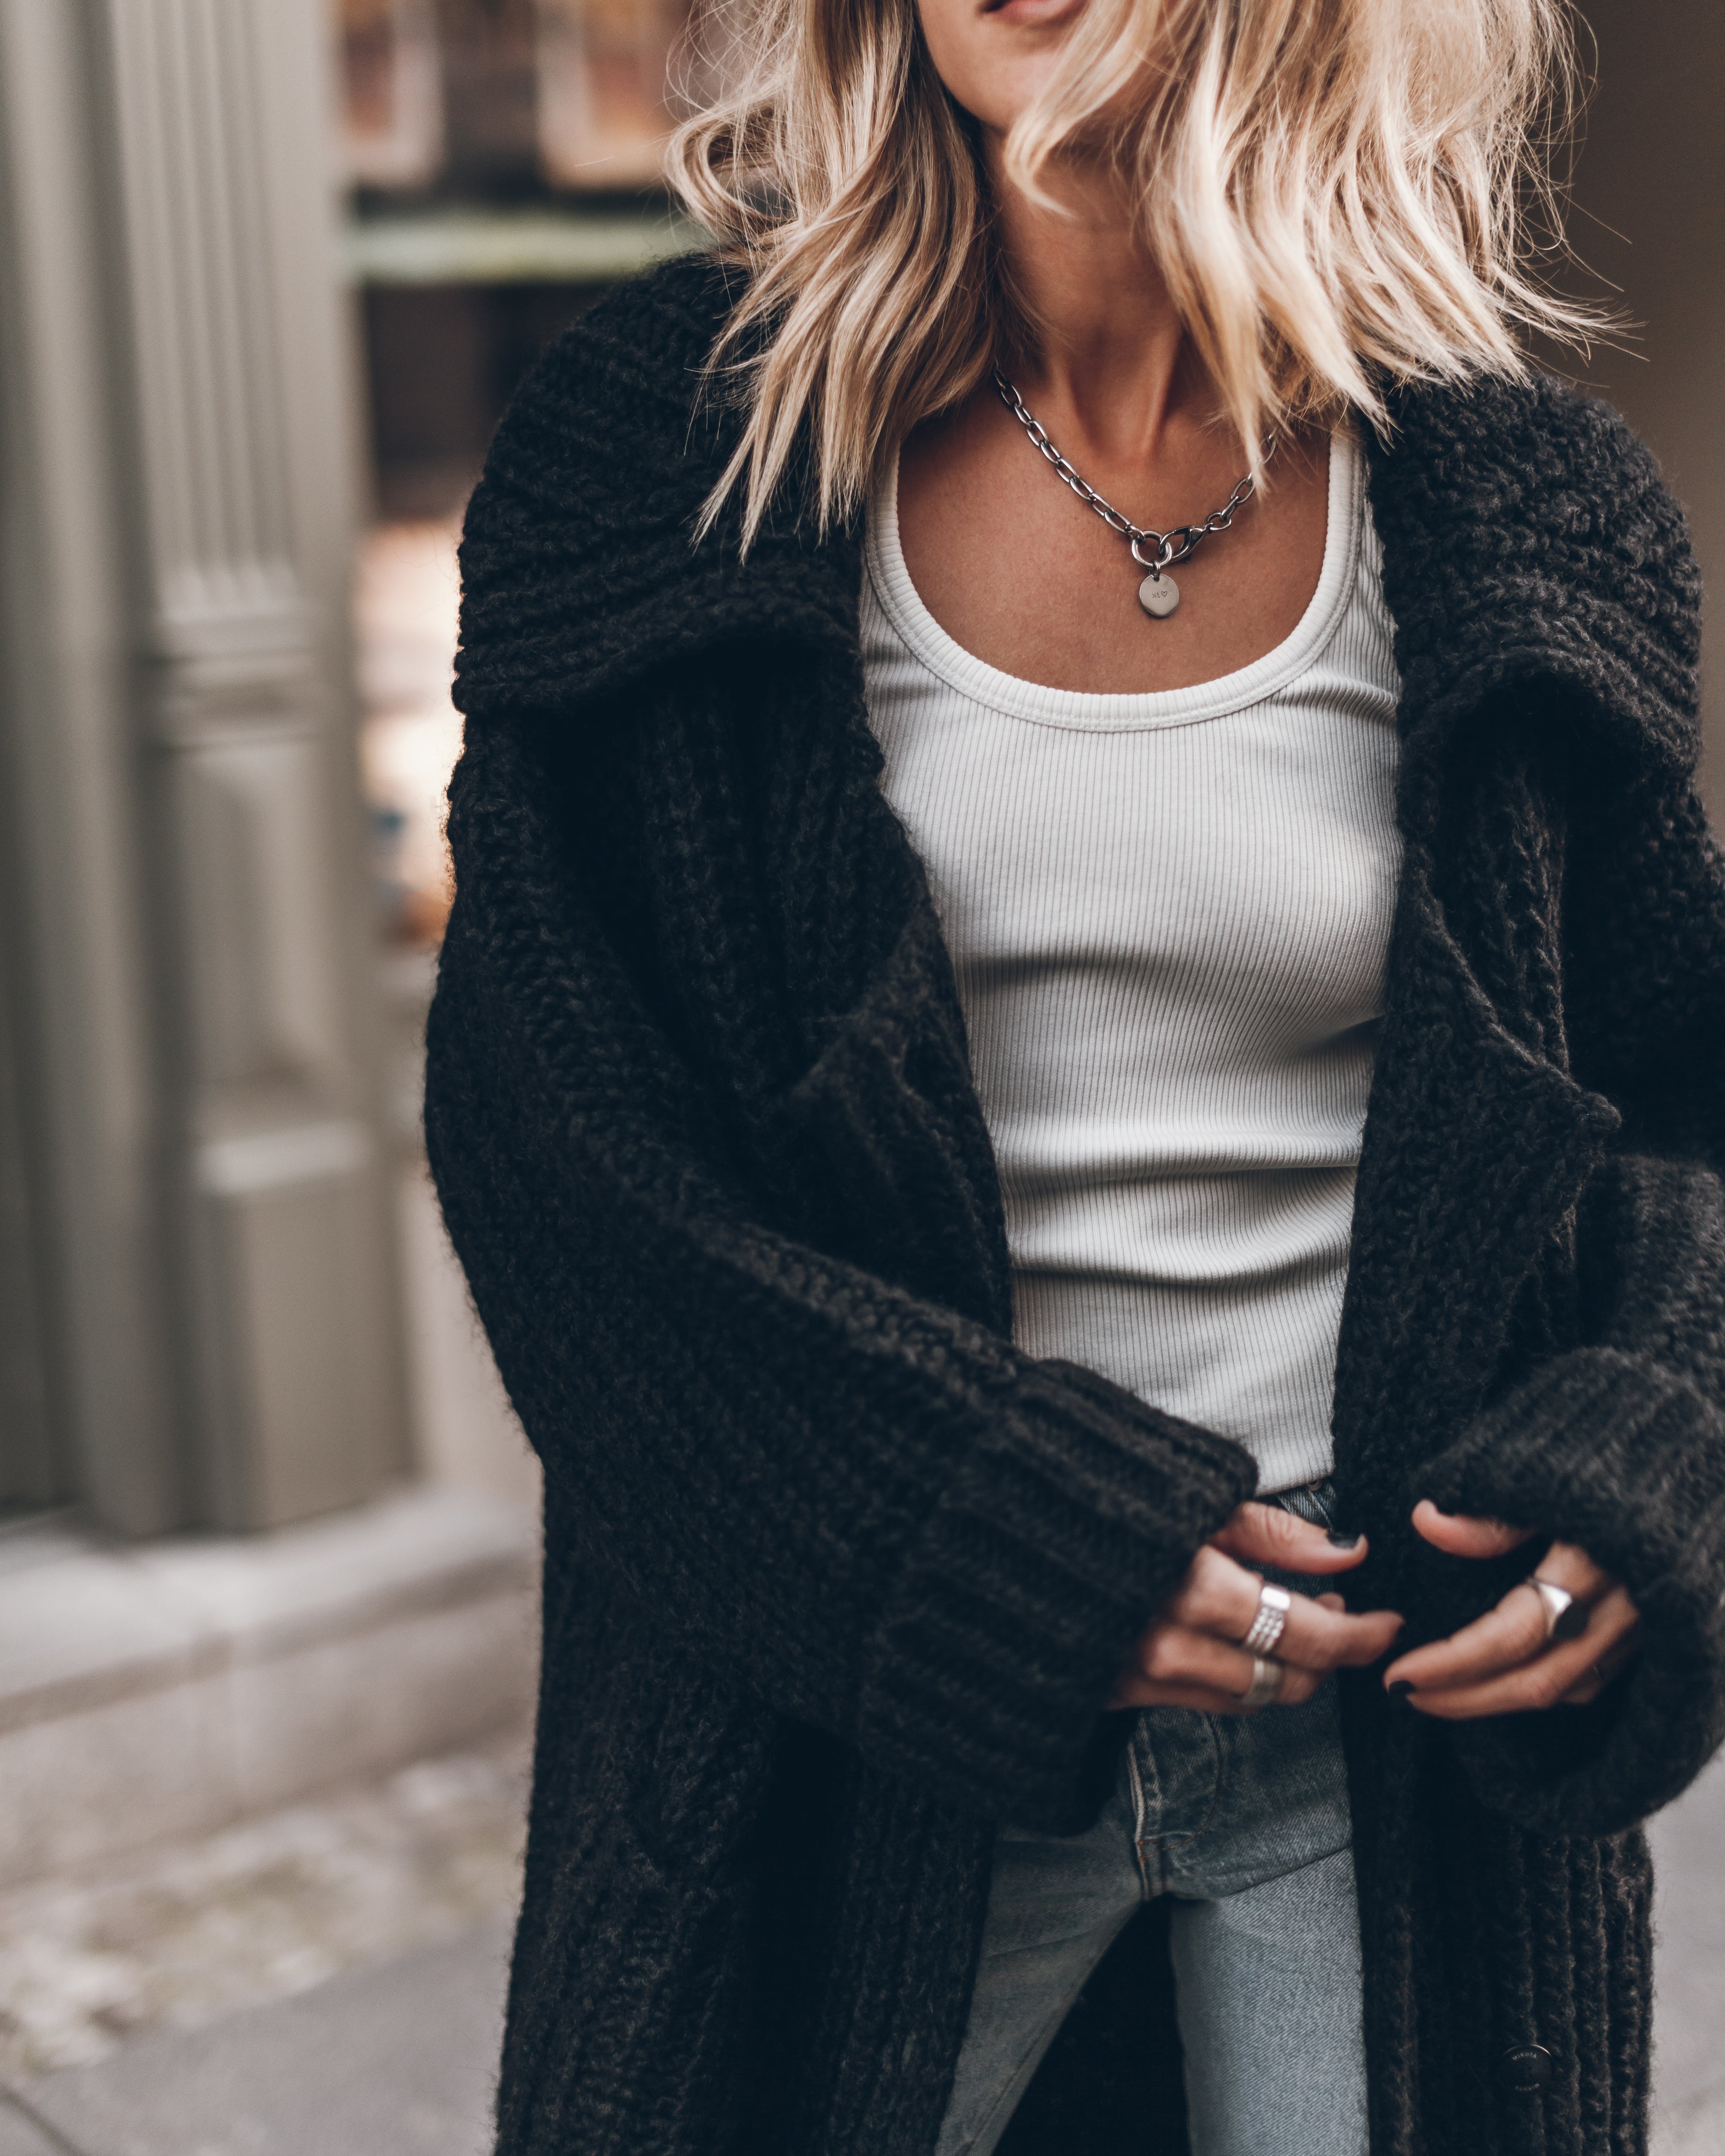 The Dark Long Knitted Cardigan